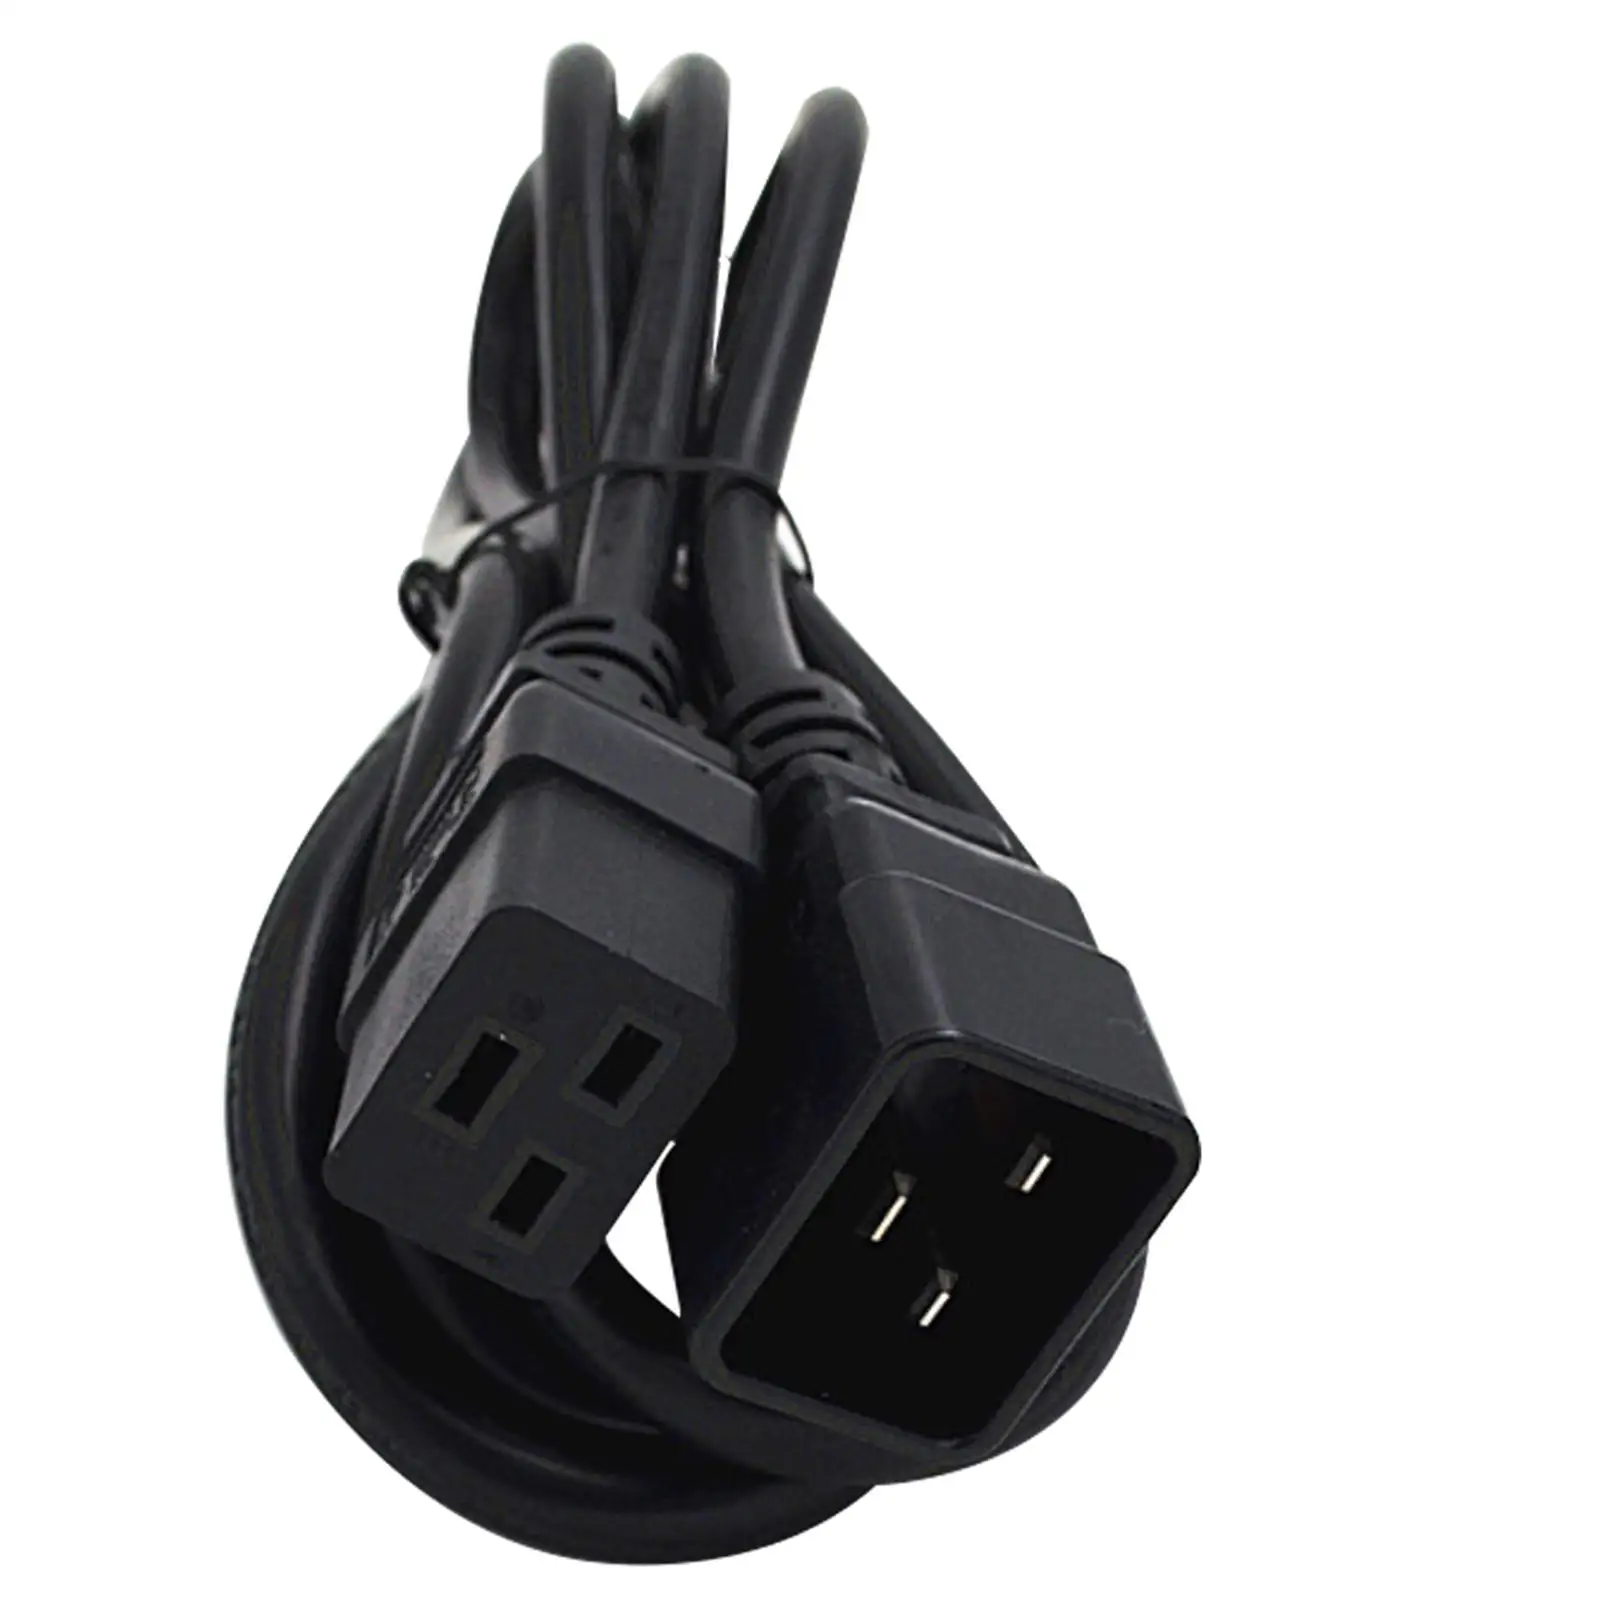 IEC320-C20 to IEC320-C19 Power Adapter Cord Universal Black Straight Rated Current 16A